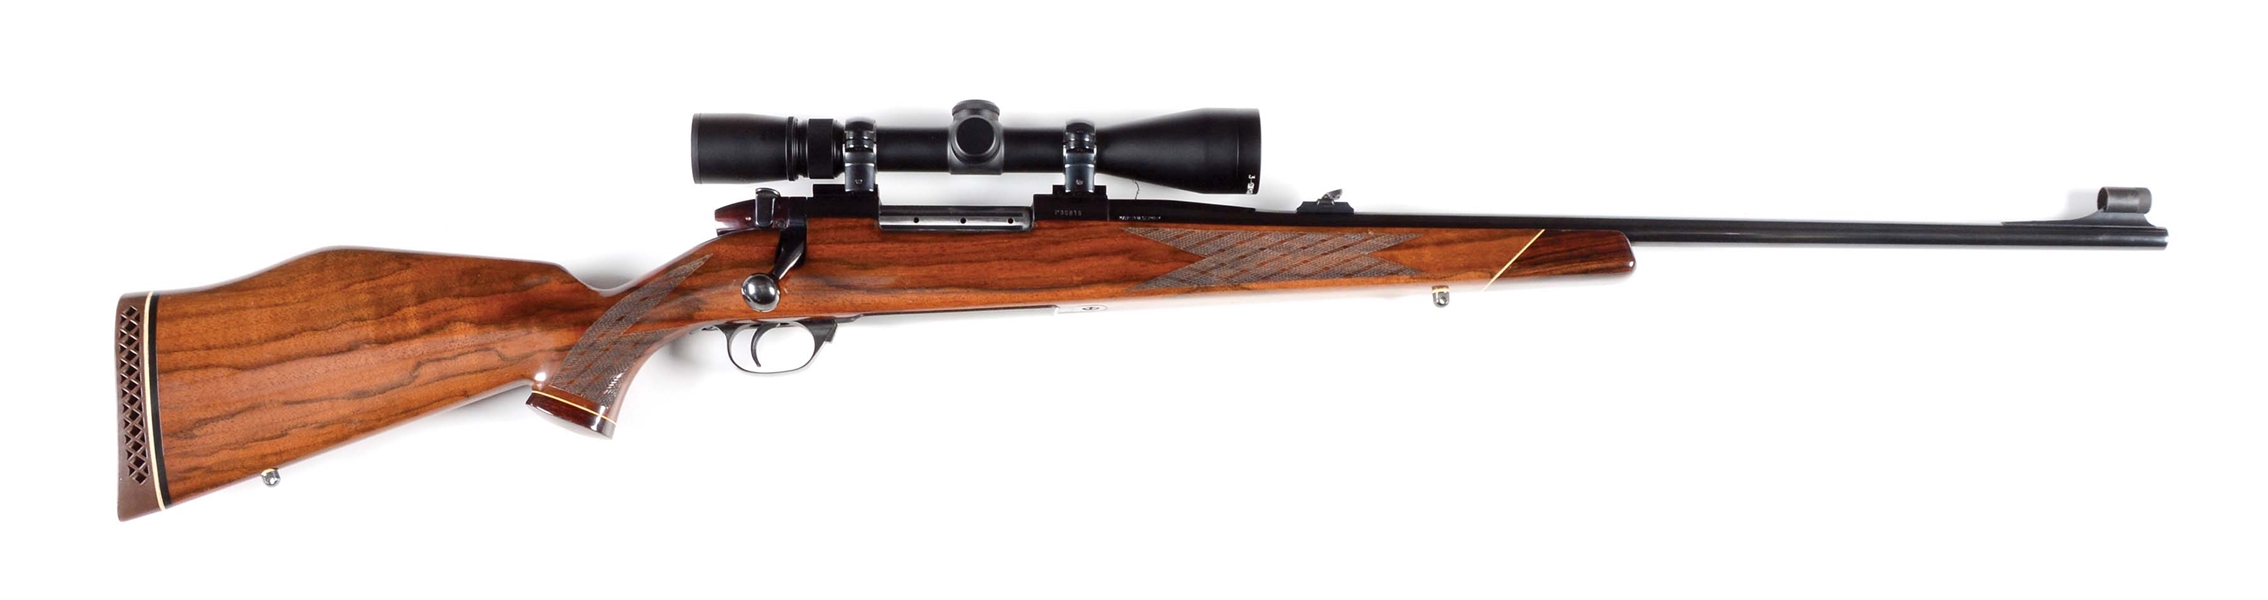 (C) WEST GERMAN WEATHERBY MARK V .30-06 BOLT ACTION RIFLE WITH SCOPE.